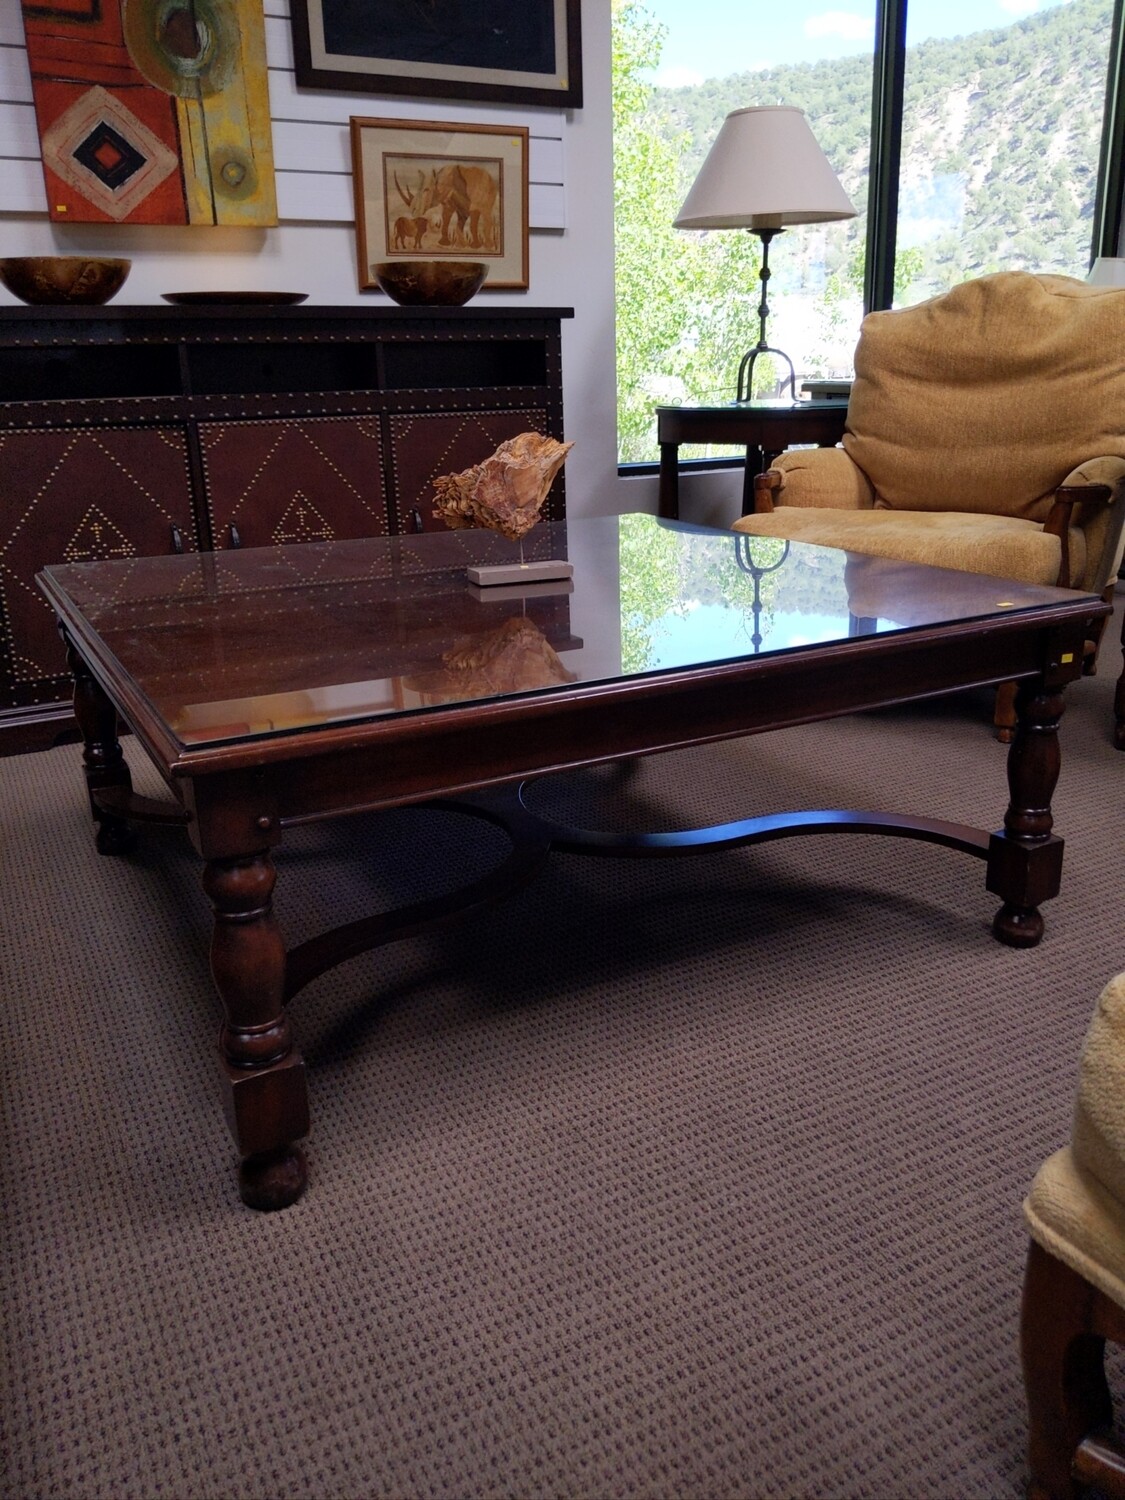 4' Square Coffee Table